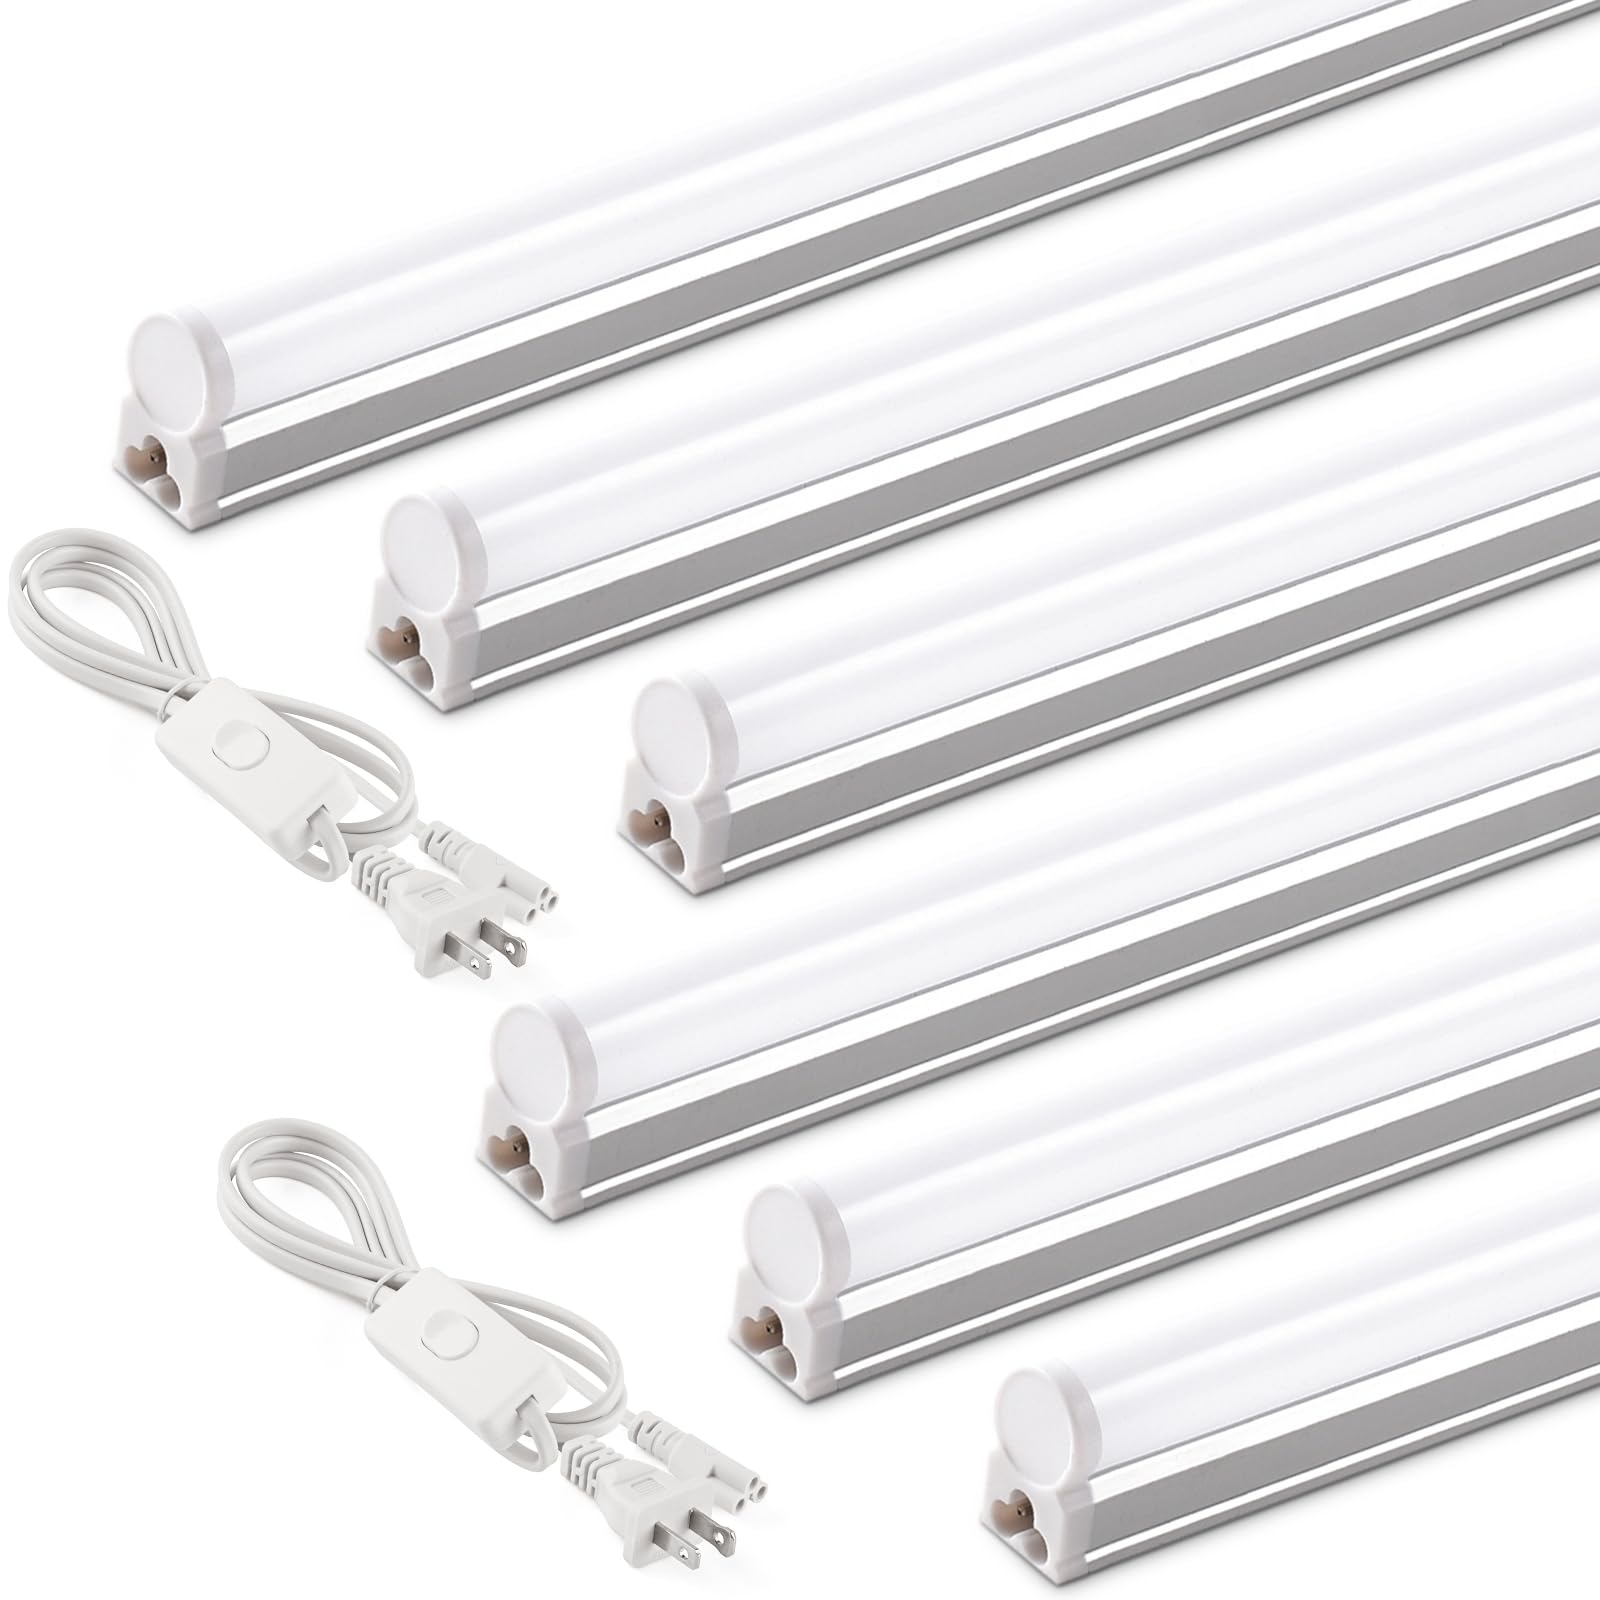 Barrina T5 4FT LED Shop Llight, 2 Pcs Power Cords 6500K Super Bright White 2200lm 20W Utility Light Fixture, Ceiling Under Cabinet Light for Workshop Garage, Corded Electric with ON/Off Switch, 6 Pack